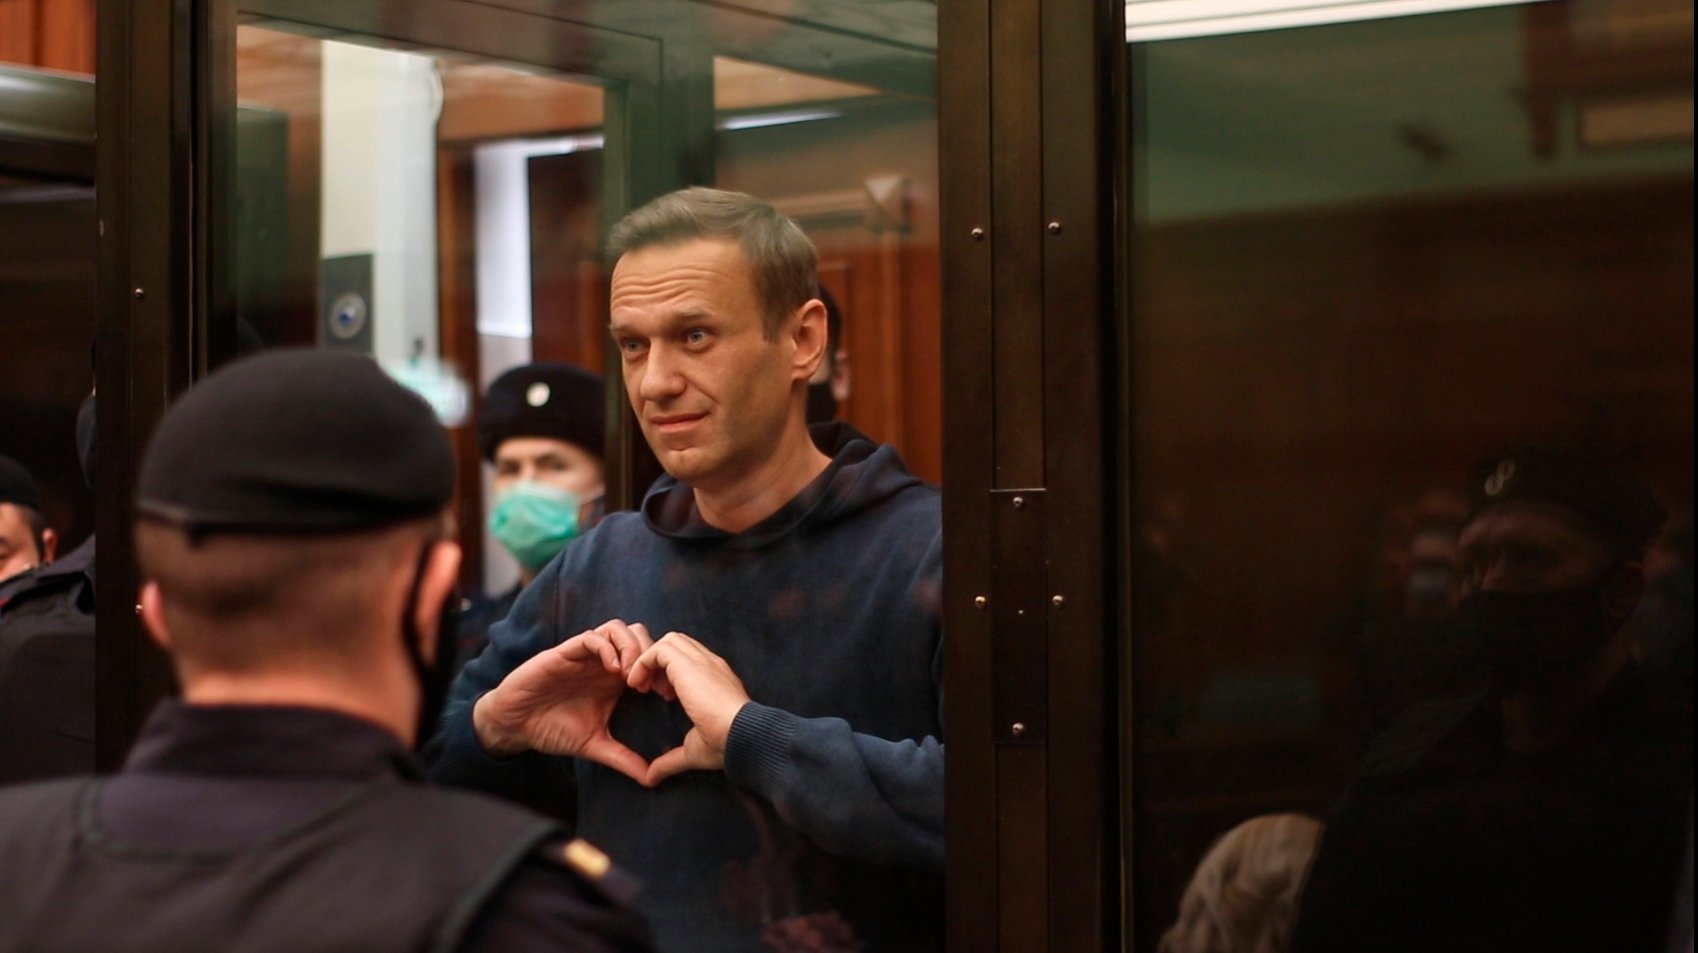 epa08982616 A still image taken from a handout video footage made available by the press service of the Moscow City Court shows an opposition leader Alexei Navalny gesturing from inside a defendant&#039;s glass cage during a visiting session of the Simonovsky district court at the Moscow City Court in Moscow, Russia, 02 February 2021. The visiting session of the Simonovsky city court decided to grant the Federal Penitentiary Service petition to replace the suspended sentence with a real one. 3.5 years in a general regime colony, while the time spent under house arrest during the investigation of the &#039;Yves Rocher&#039; case must be credited. Thus, when the sentence comes into force, the term will be 2 years 8 months. Opposition leader Alexei Navalny was detained after his arrival to Moscow from Germany on 17 January 2021. A Moscow judge on 18 January ruled that he will remain in custody for 30 days following his airport arrest.  EPA/MOSCOW CITY COURT PRESS SERVICE HANDOUT MANDATORY CREDIT HANDOUT EDITORIAL USE ONLY/NO SALES  EPA-EFE/MOSCOW CITY COURT PRESS SERVICE MANDATORY CREDIT HANDOUT EDITORIAL USE ONLY/NO SALES